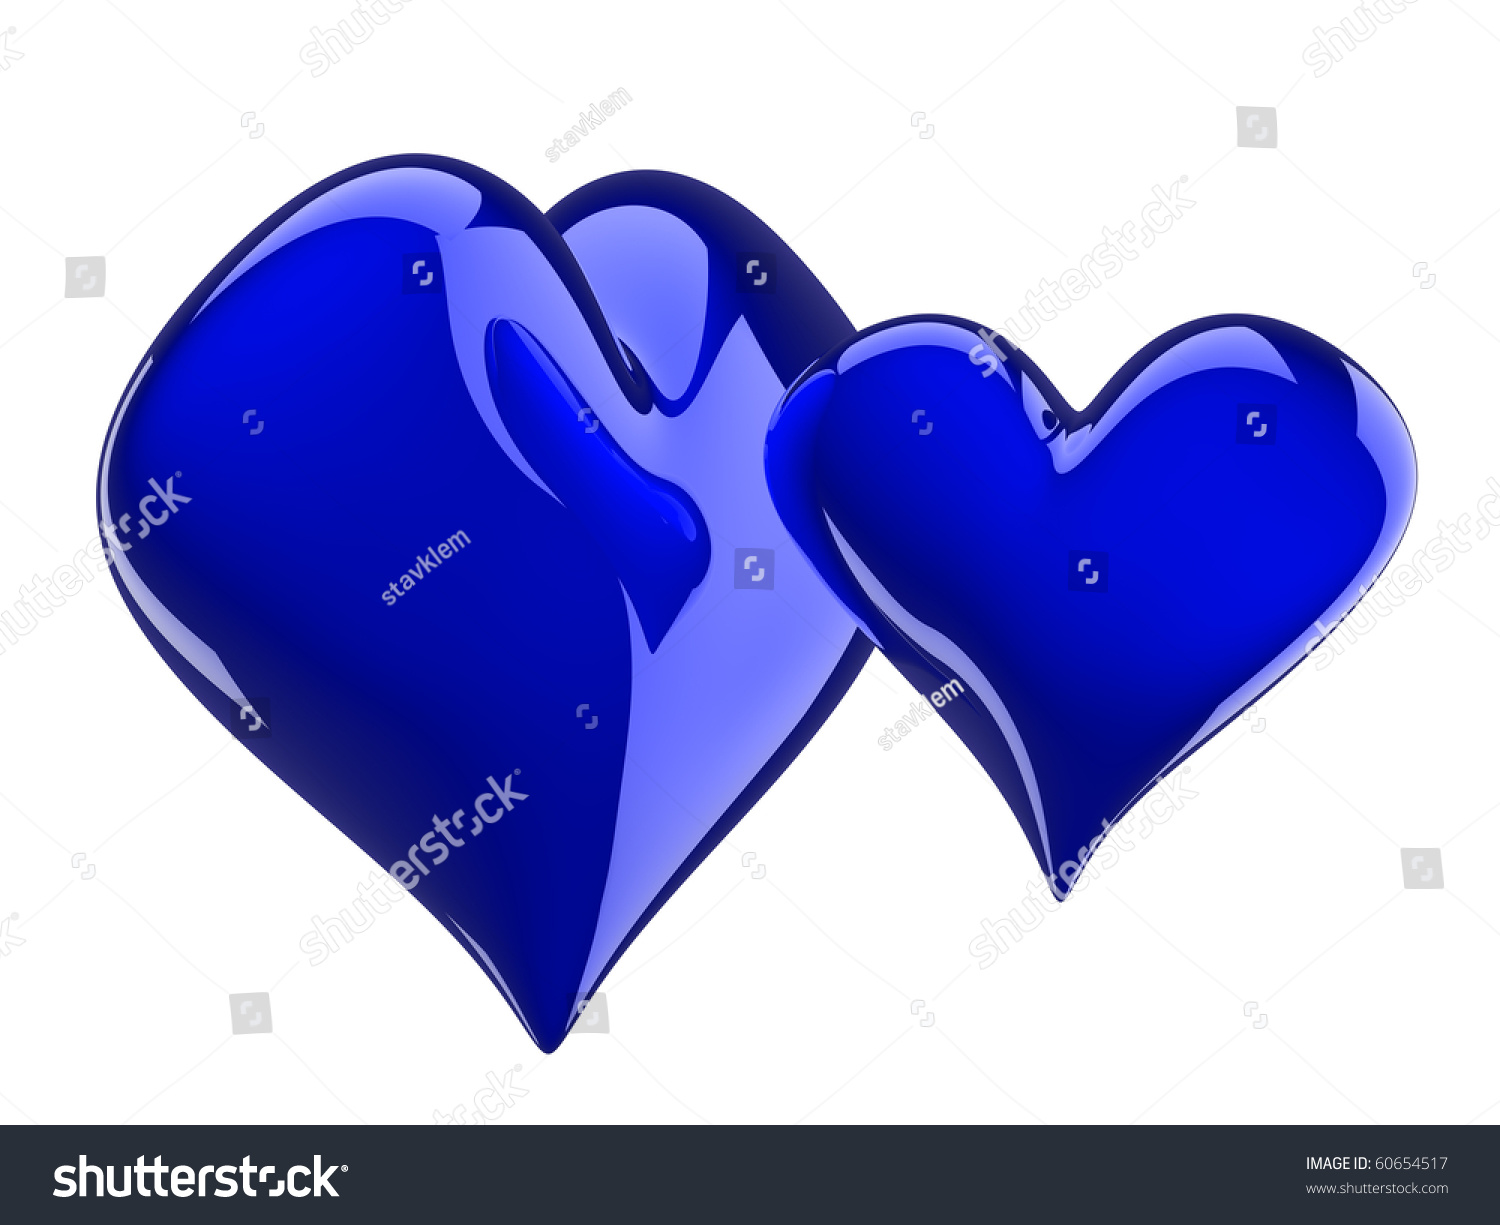 Two Glossy Blue Hearts Isolated On White Stock Photo 60654517 ...